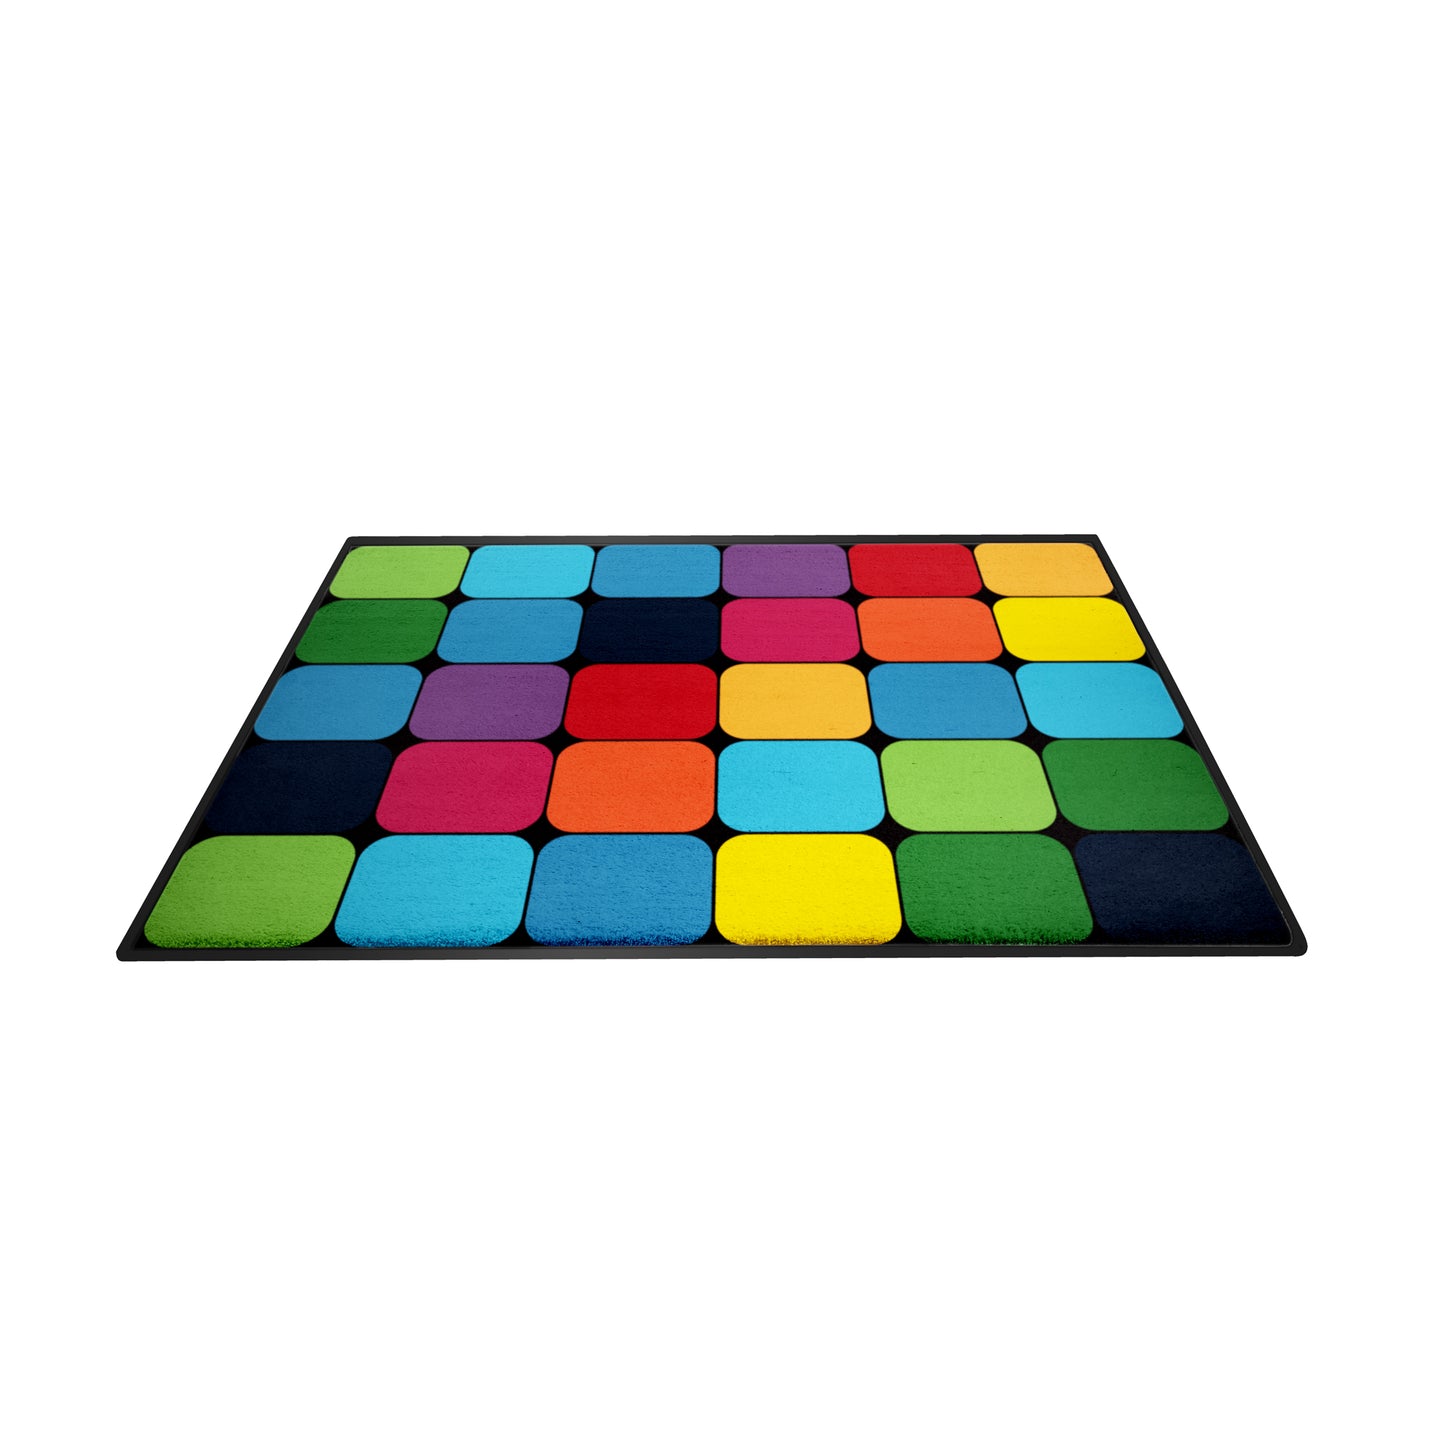 Coloured Rounded Square Placement 30 Grid Rug (2m x 3m)